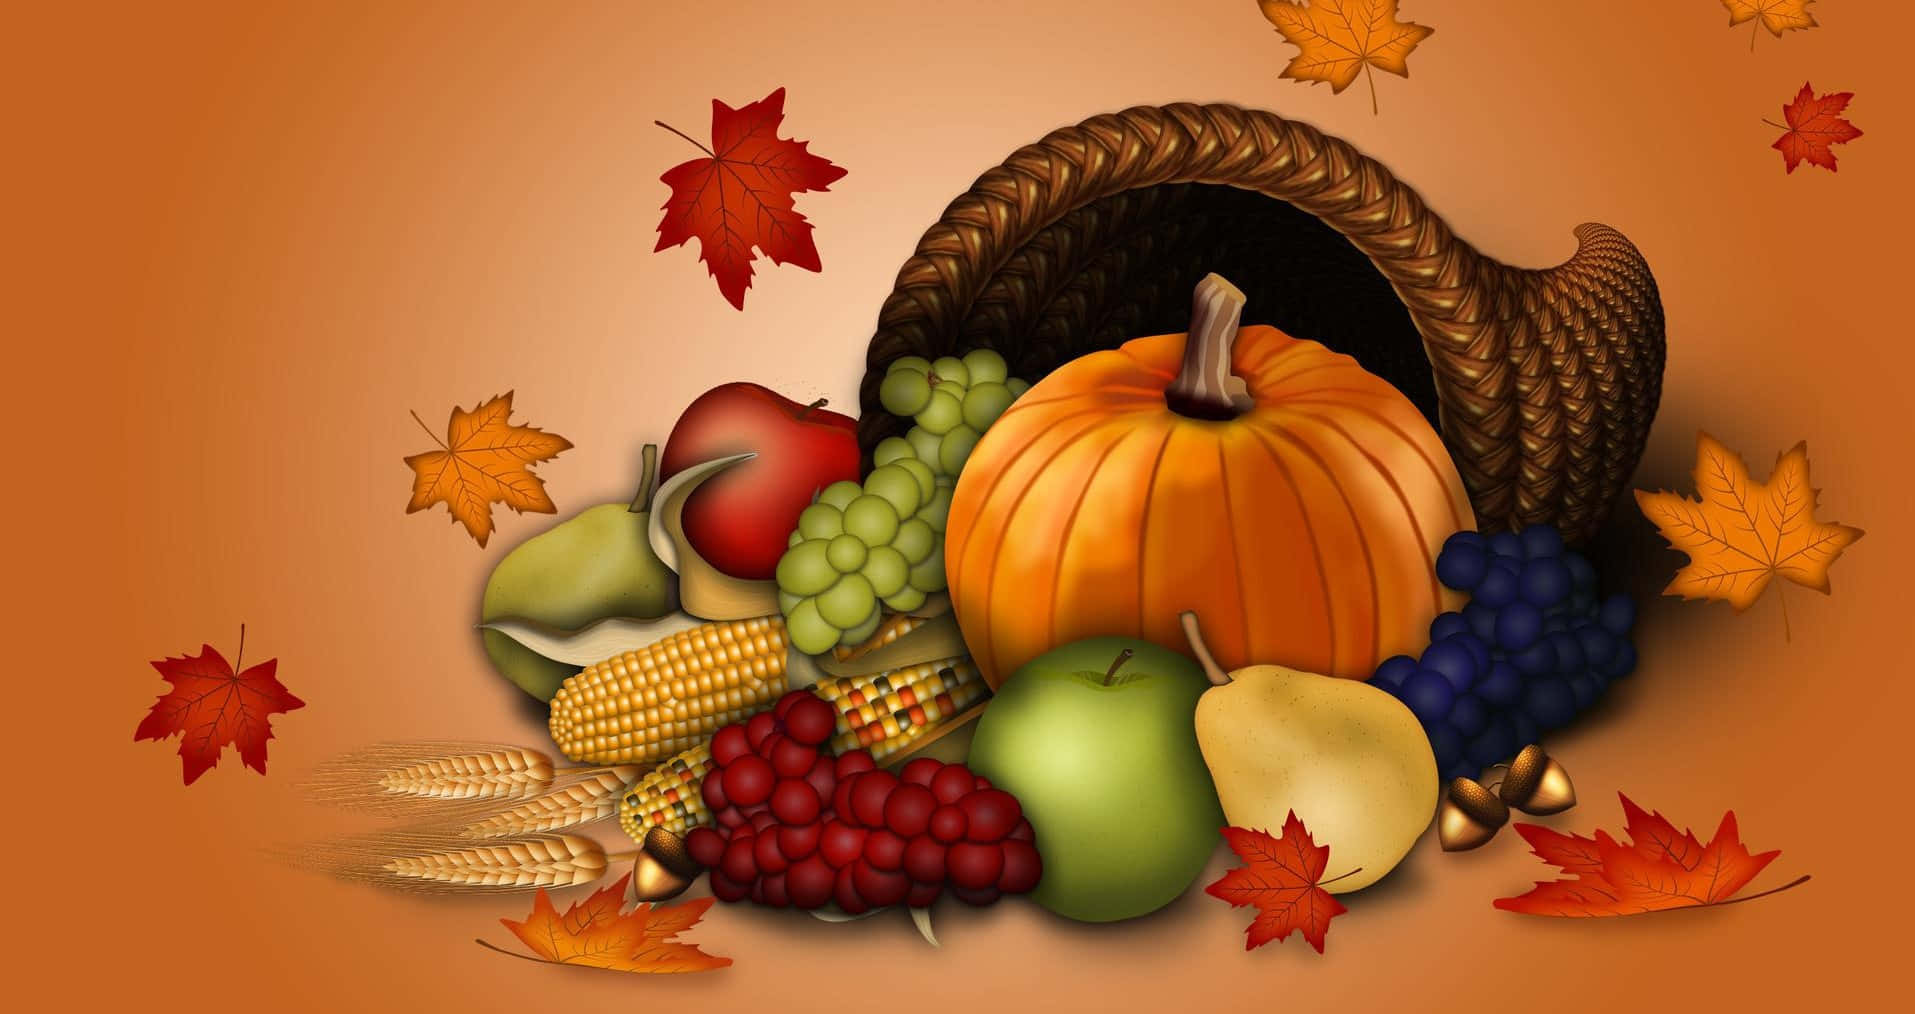 High Resolution Thanksgiving Basket Of Fruits And Vegetables Background